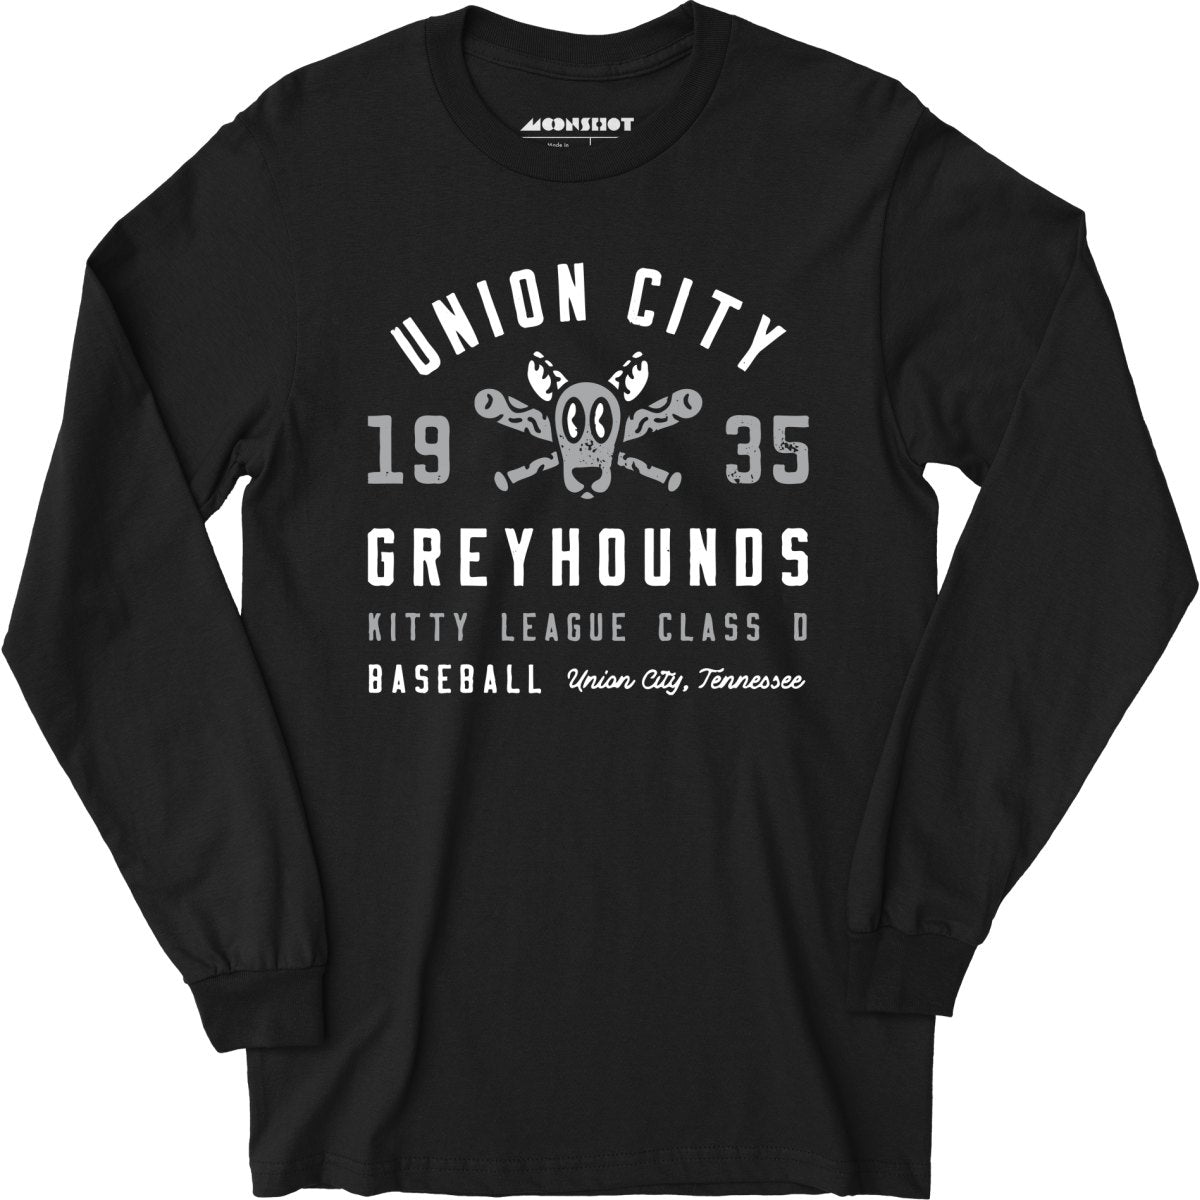 Union City Greyhounds - Tennessee - Vintage Defunct Baseball Teams - Long Sleeve T-Shirt